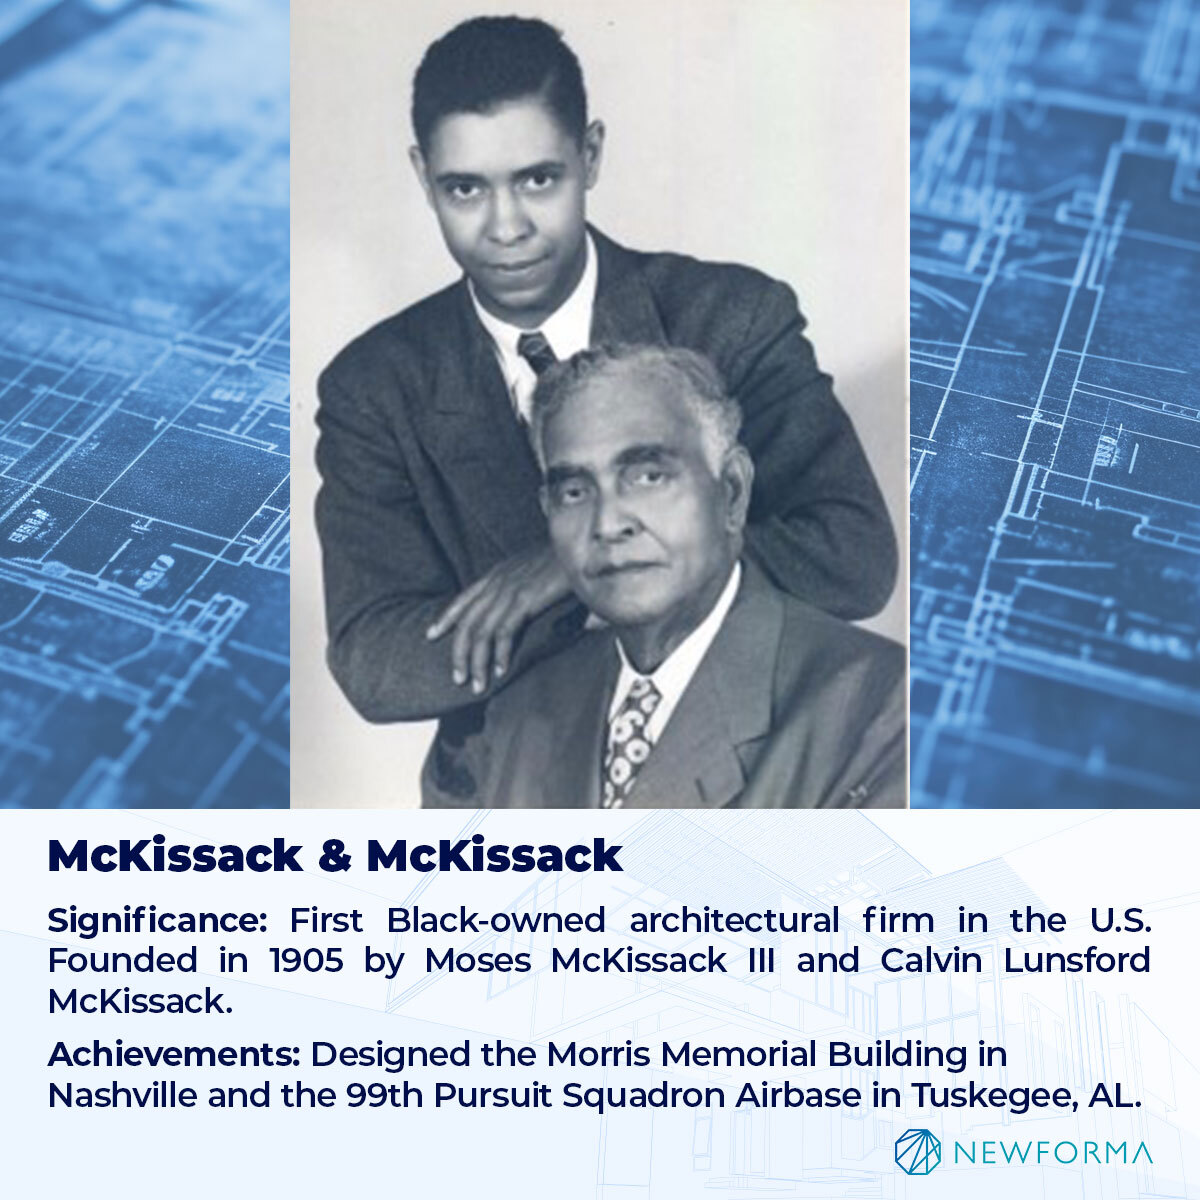 SIGNIFICANCE: FIRST BLACK-OWNED ARCHITECTURAL FIRM IN THE U.S. (FOUNDED IN 1905 BY MOSES MCKISSACK III AND CALVIN LUNSFORD MCKISSACK). 
ACHIEVEMENTS: DESIGNED THE MORRIS MEMORIAL BUILDING IN NASHVILLE AND THE 99TH PURSUIT SQUADRON AIRBASE IN TUSKEGEE, ALABAMA. 
